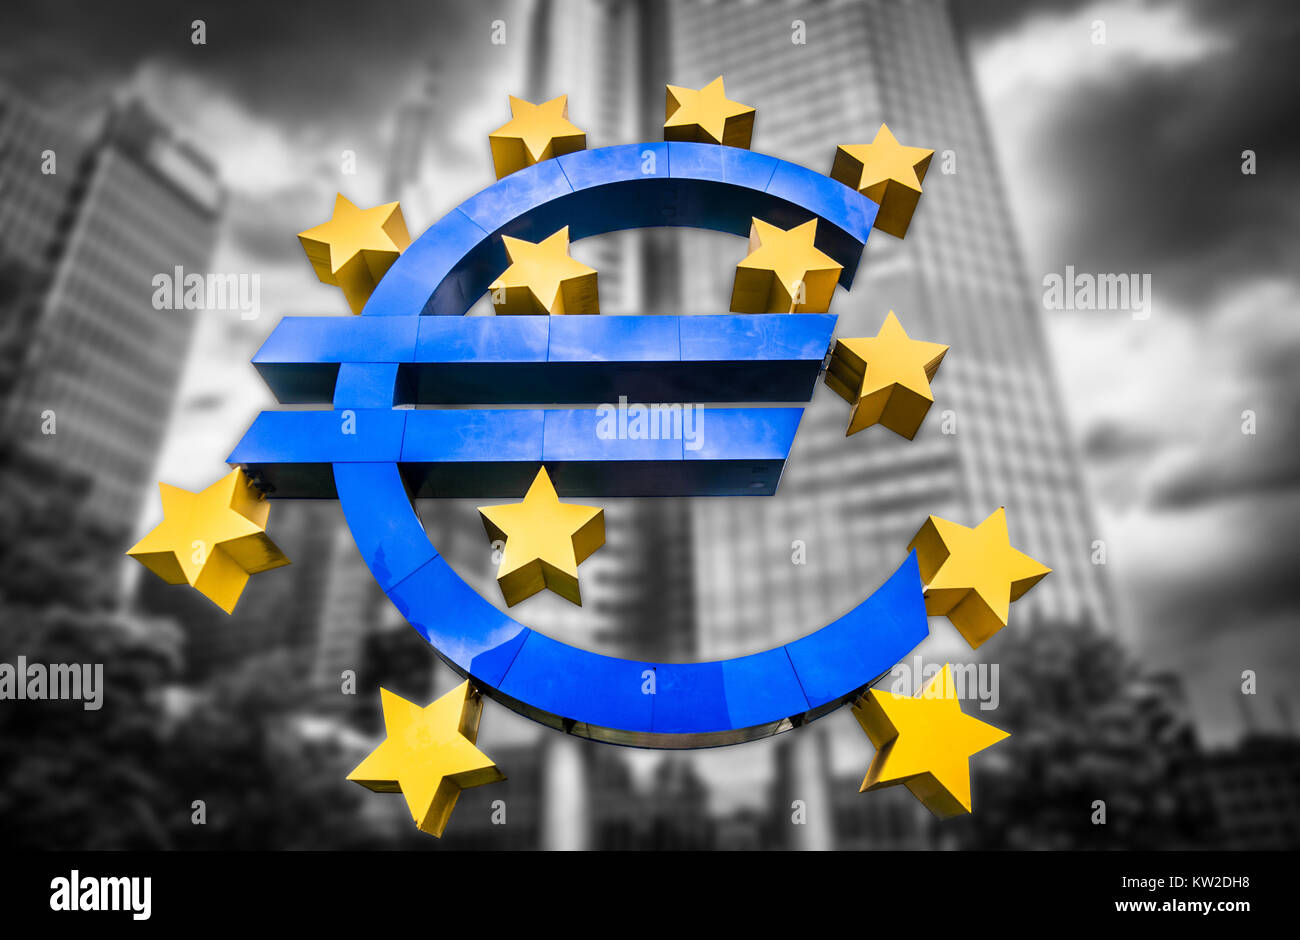 Euro sign at European Central Bank headquarters in Frankfurt, Germany on abstract blurred background of dark dramatic clouds symbolizing a financial c Stock Photo